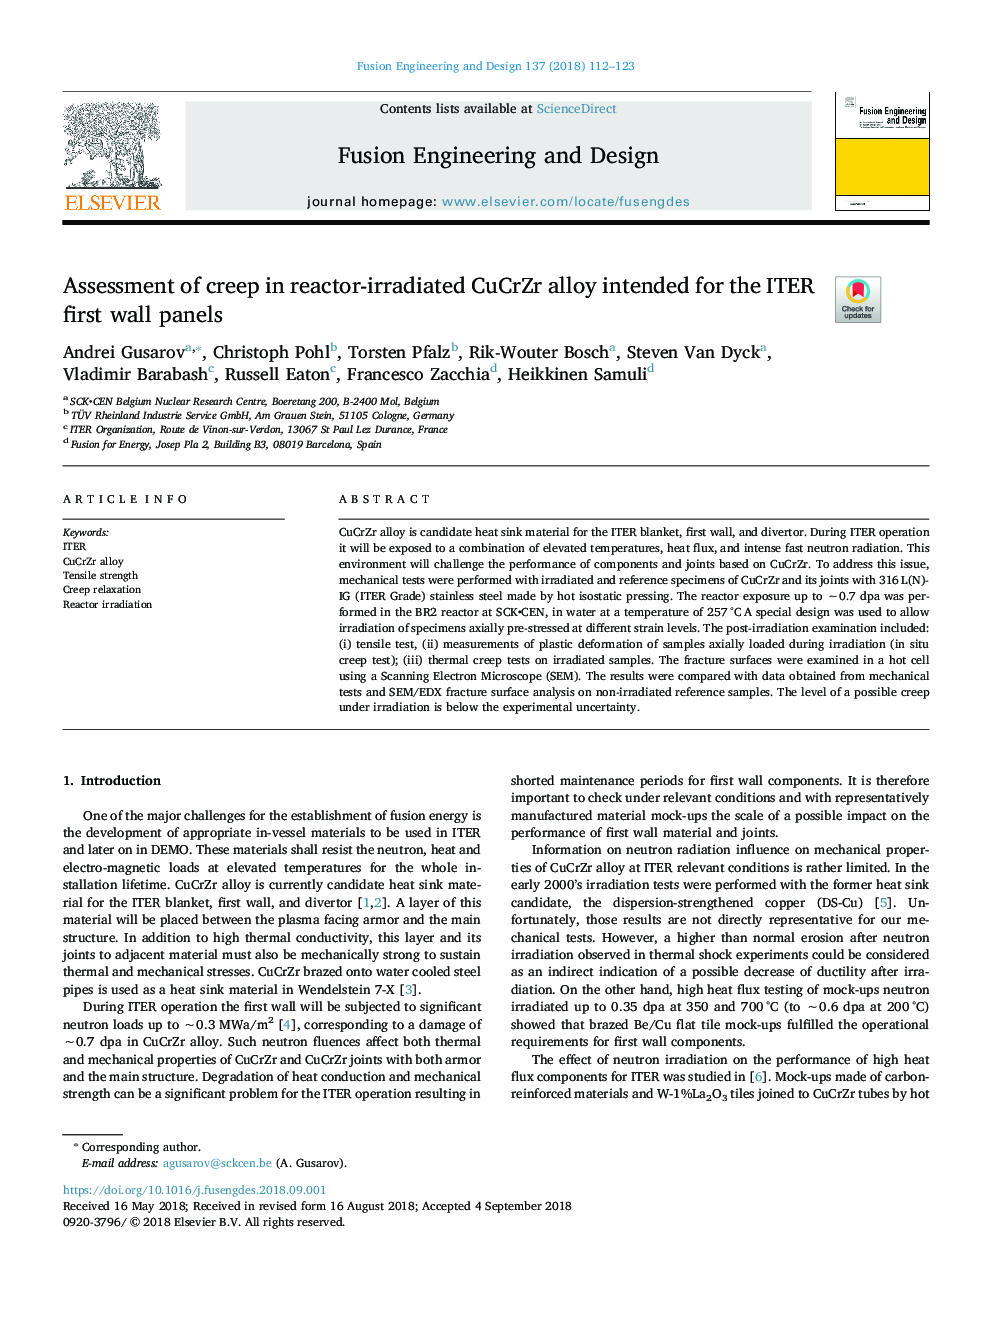 Assessment of creep in reactor-irradiated CuCrZr alloy intended for the ITER first wall panels